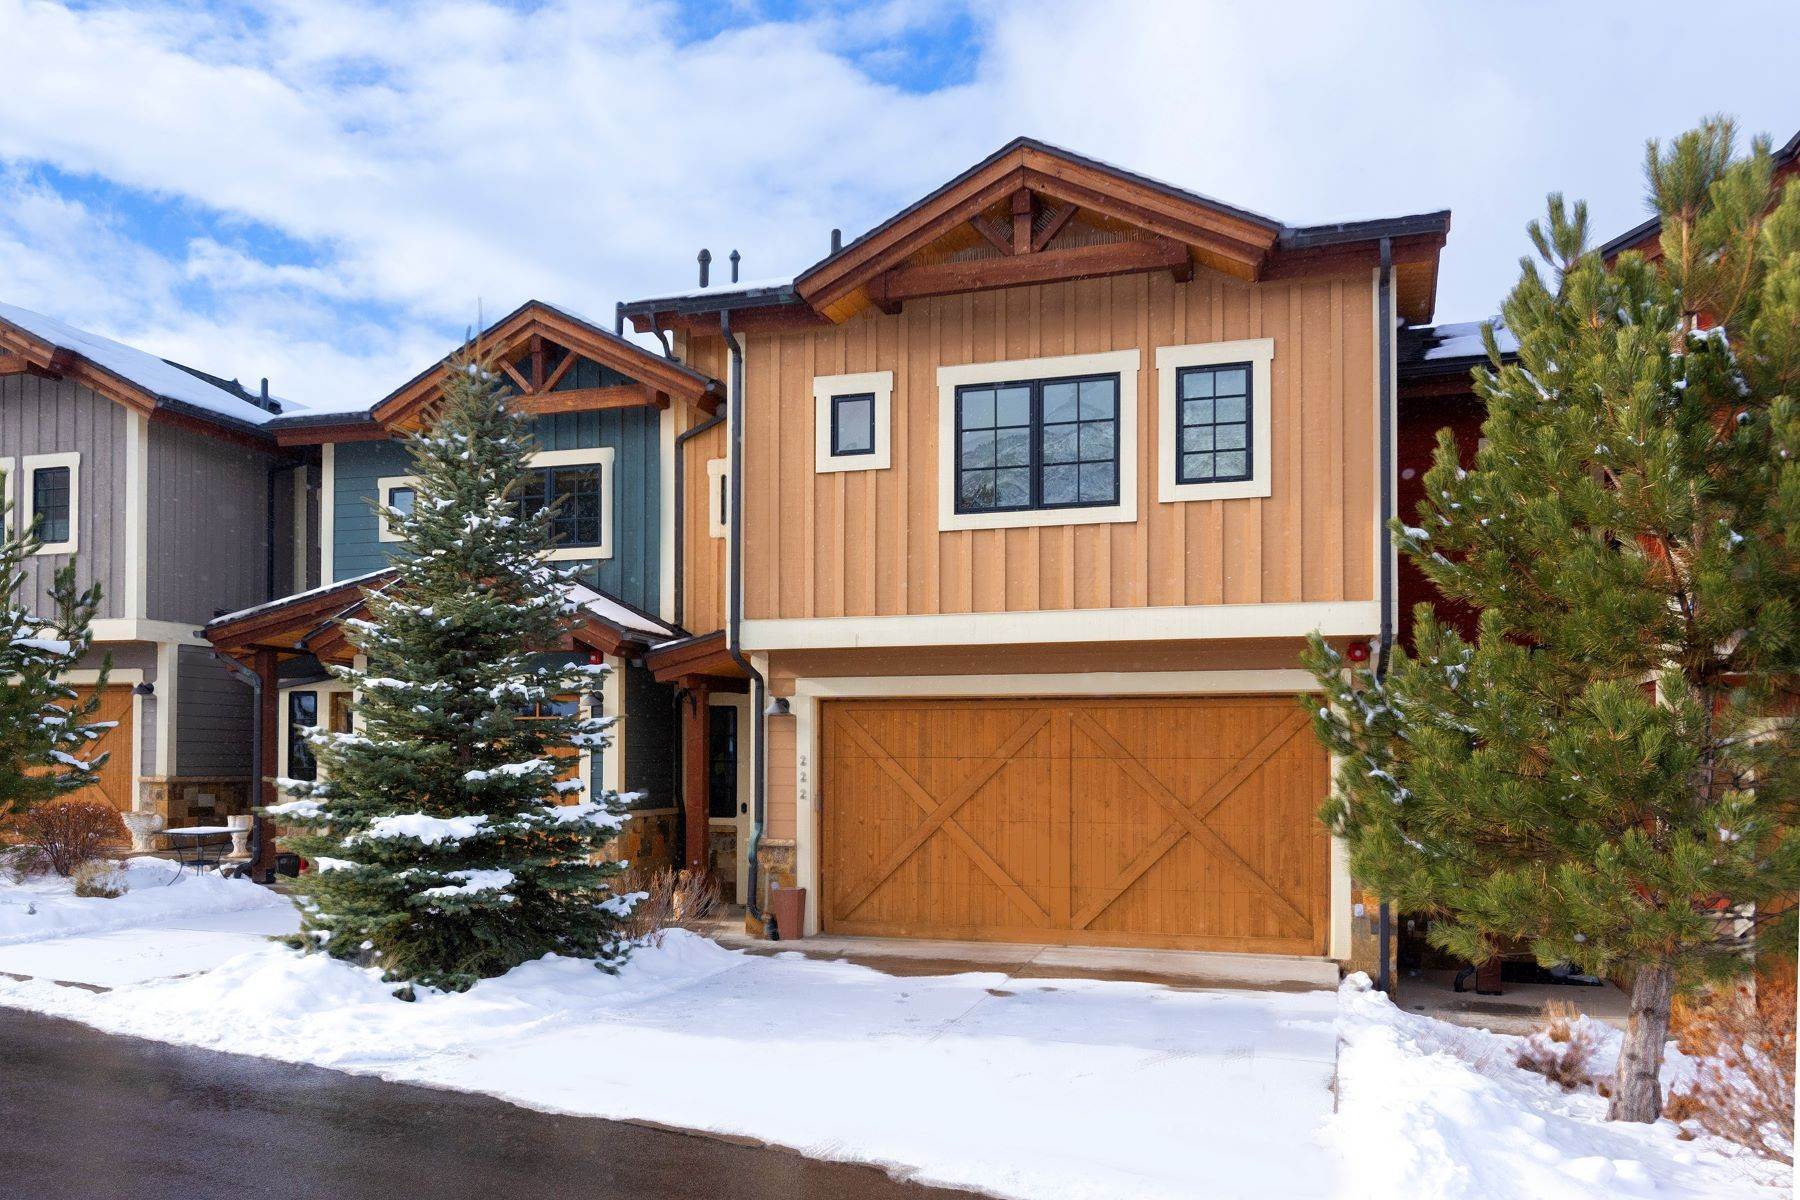 Single Family Homes for Sale at Shadowrock Townhomes 222 Overlook Ridge Carbondale, Colorado 81623 United States